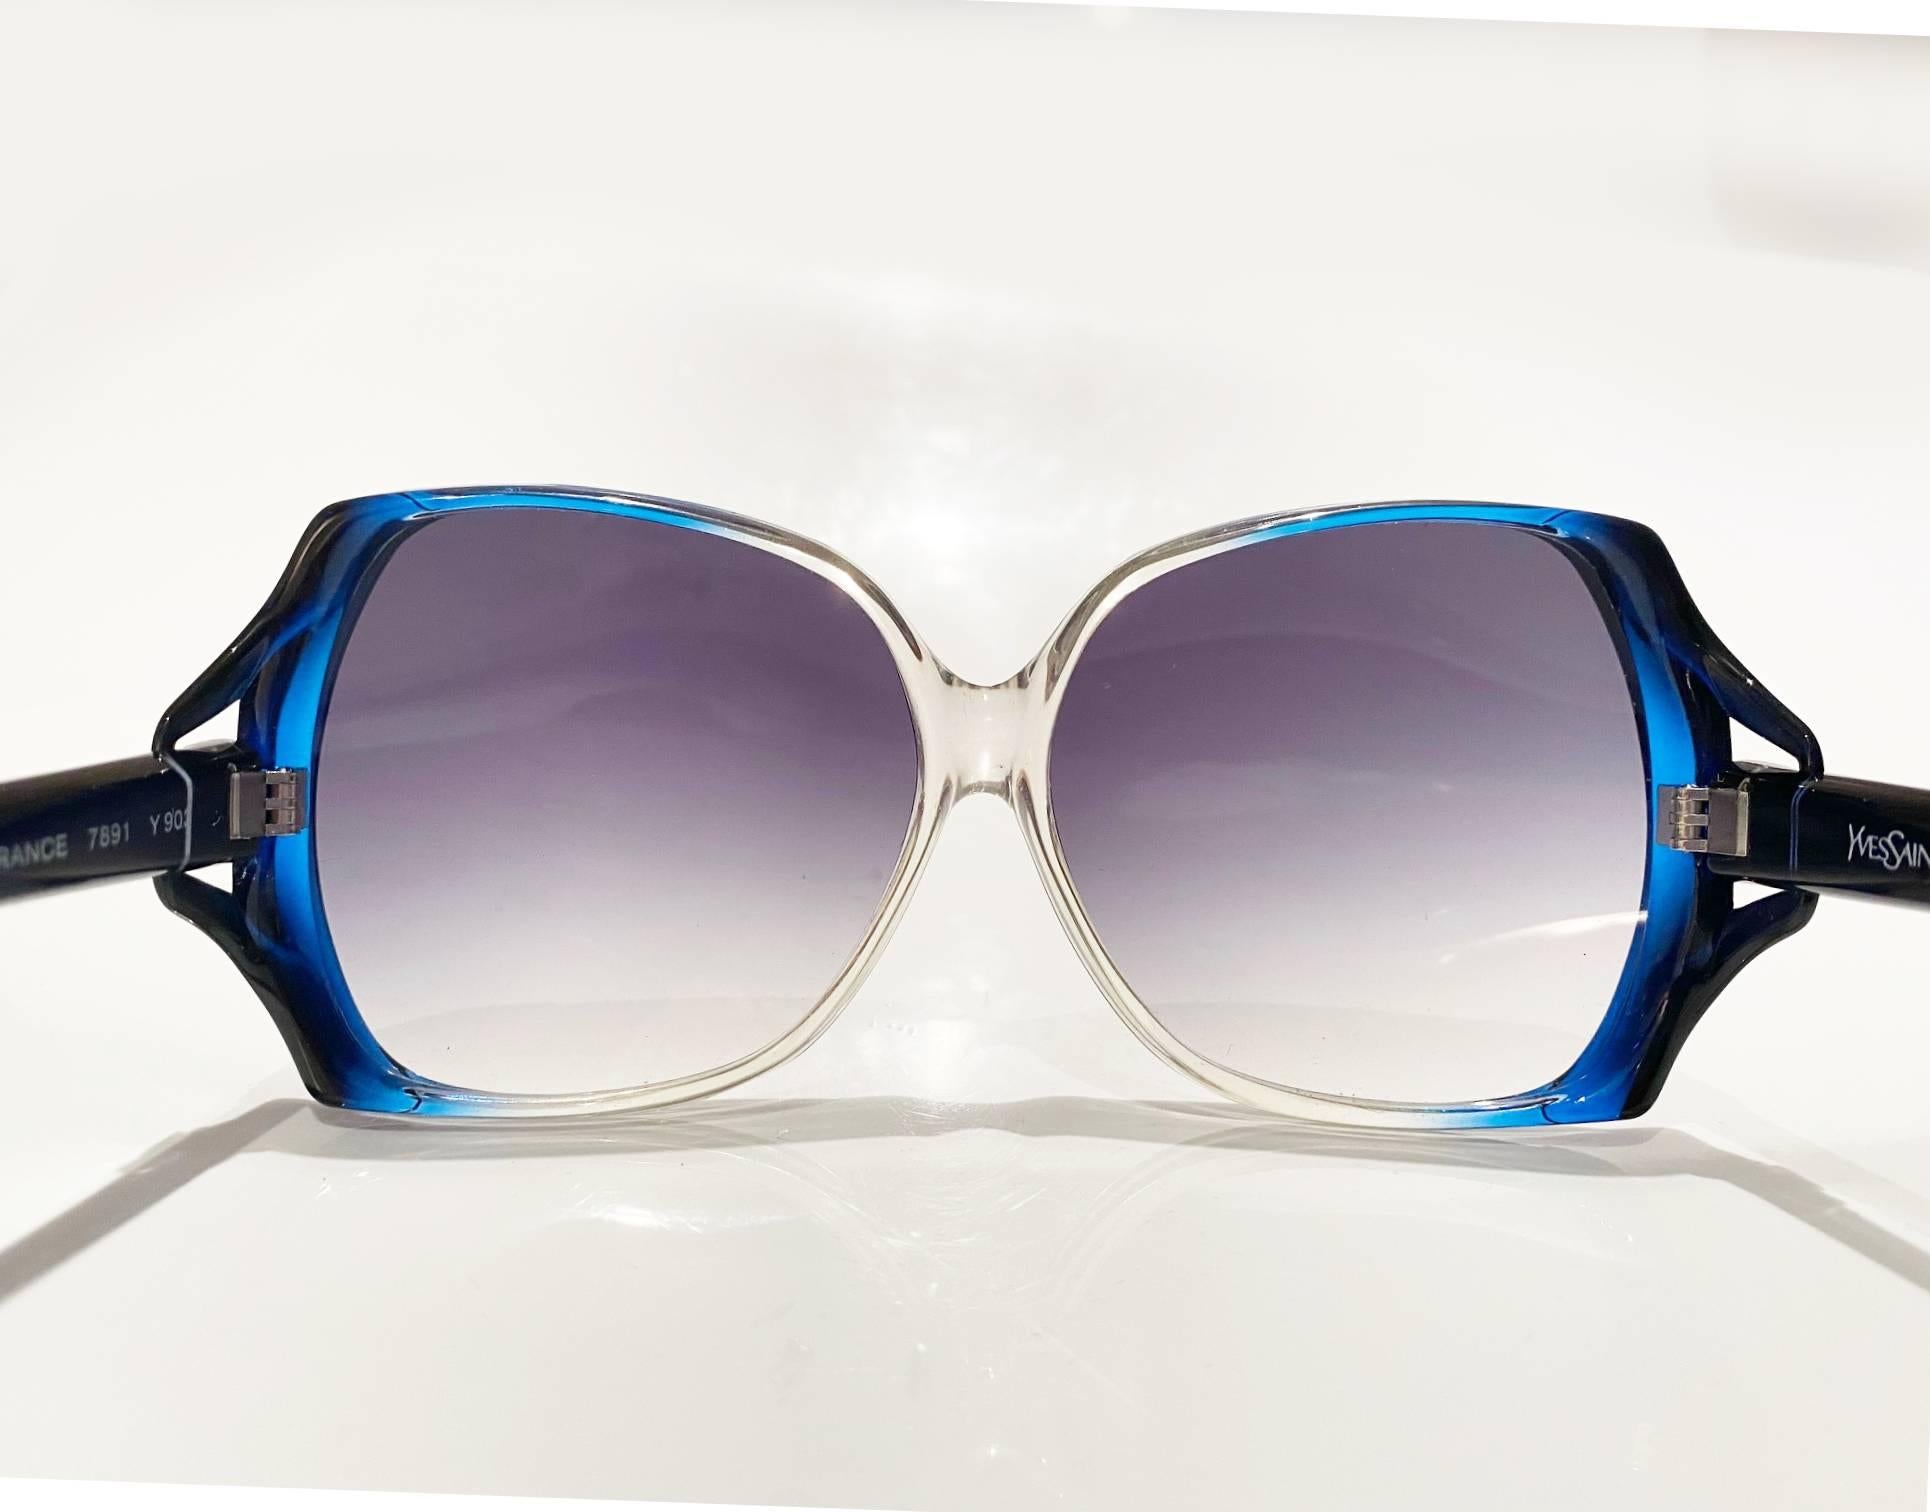 Yves Saint Laurent oversized sunglasses , blue clear, logo on black side tag,Made in France 

Condition: excellent 1980s vintage, original case included 

Measurements: 
- total width: 14.5cm / 5.7in
- bridge distance: 3cm / 1.8in
- lens height: 7cm